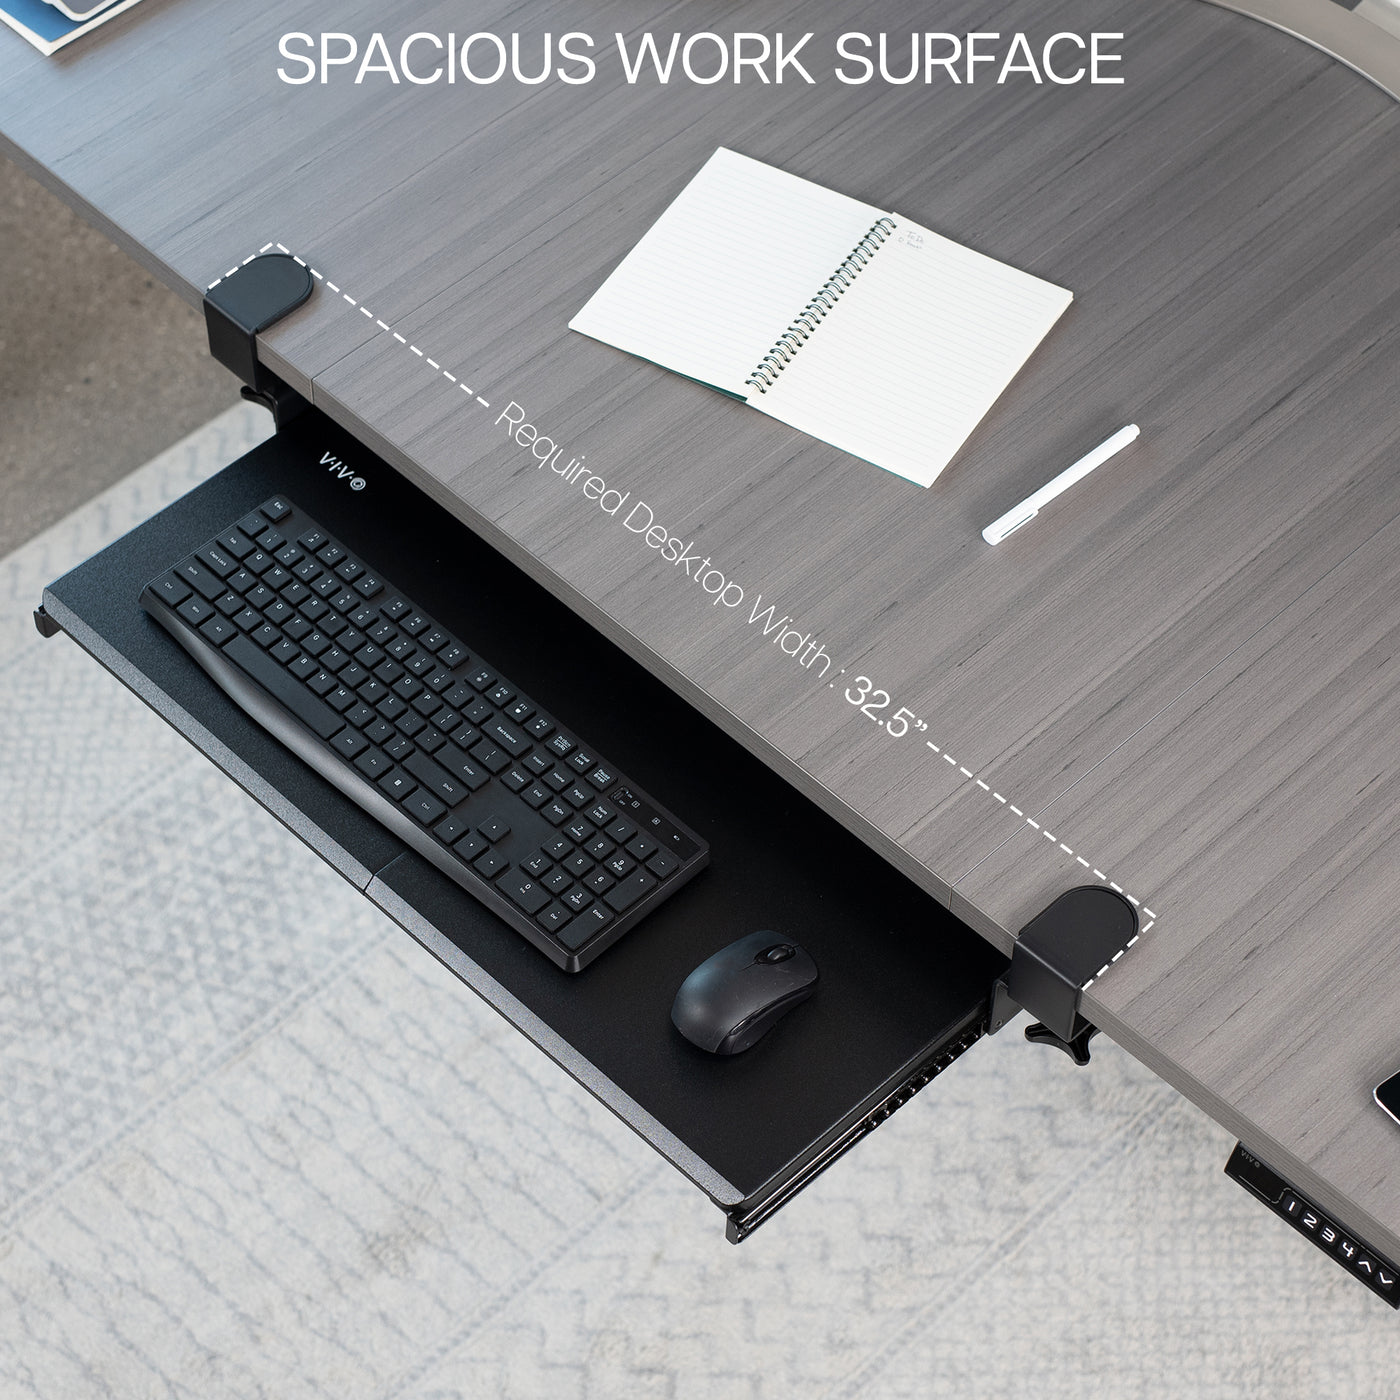 Clamp-on Keyboard Tray – VIVO - desk solutions, screen mounting